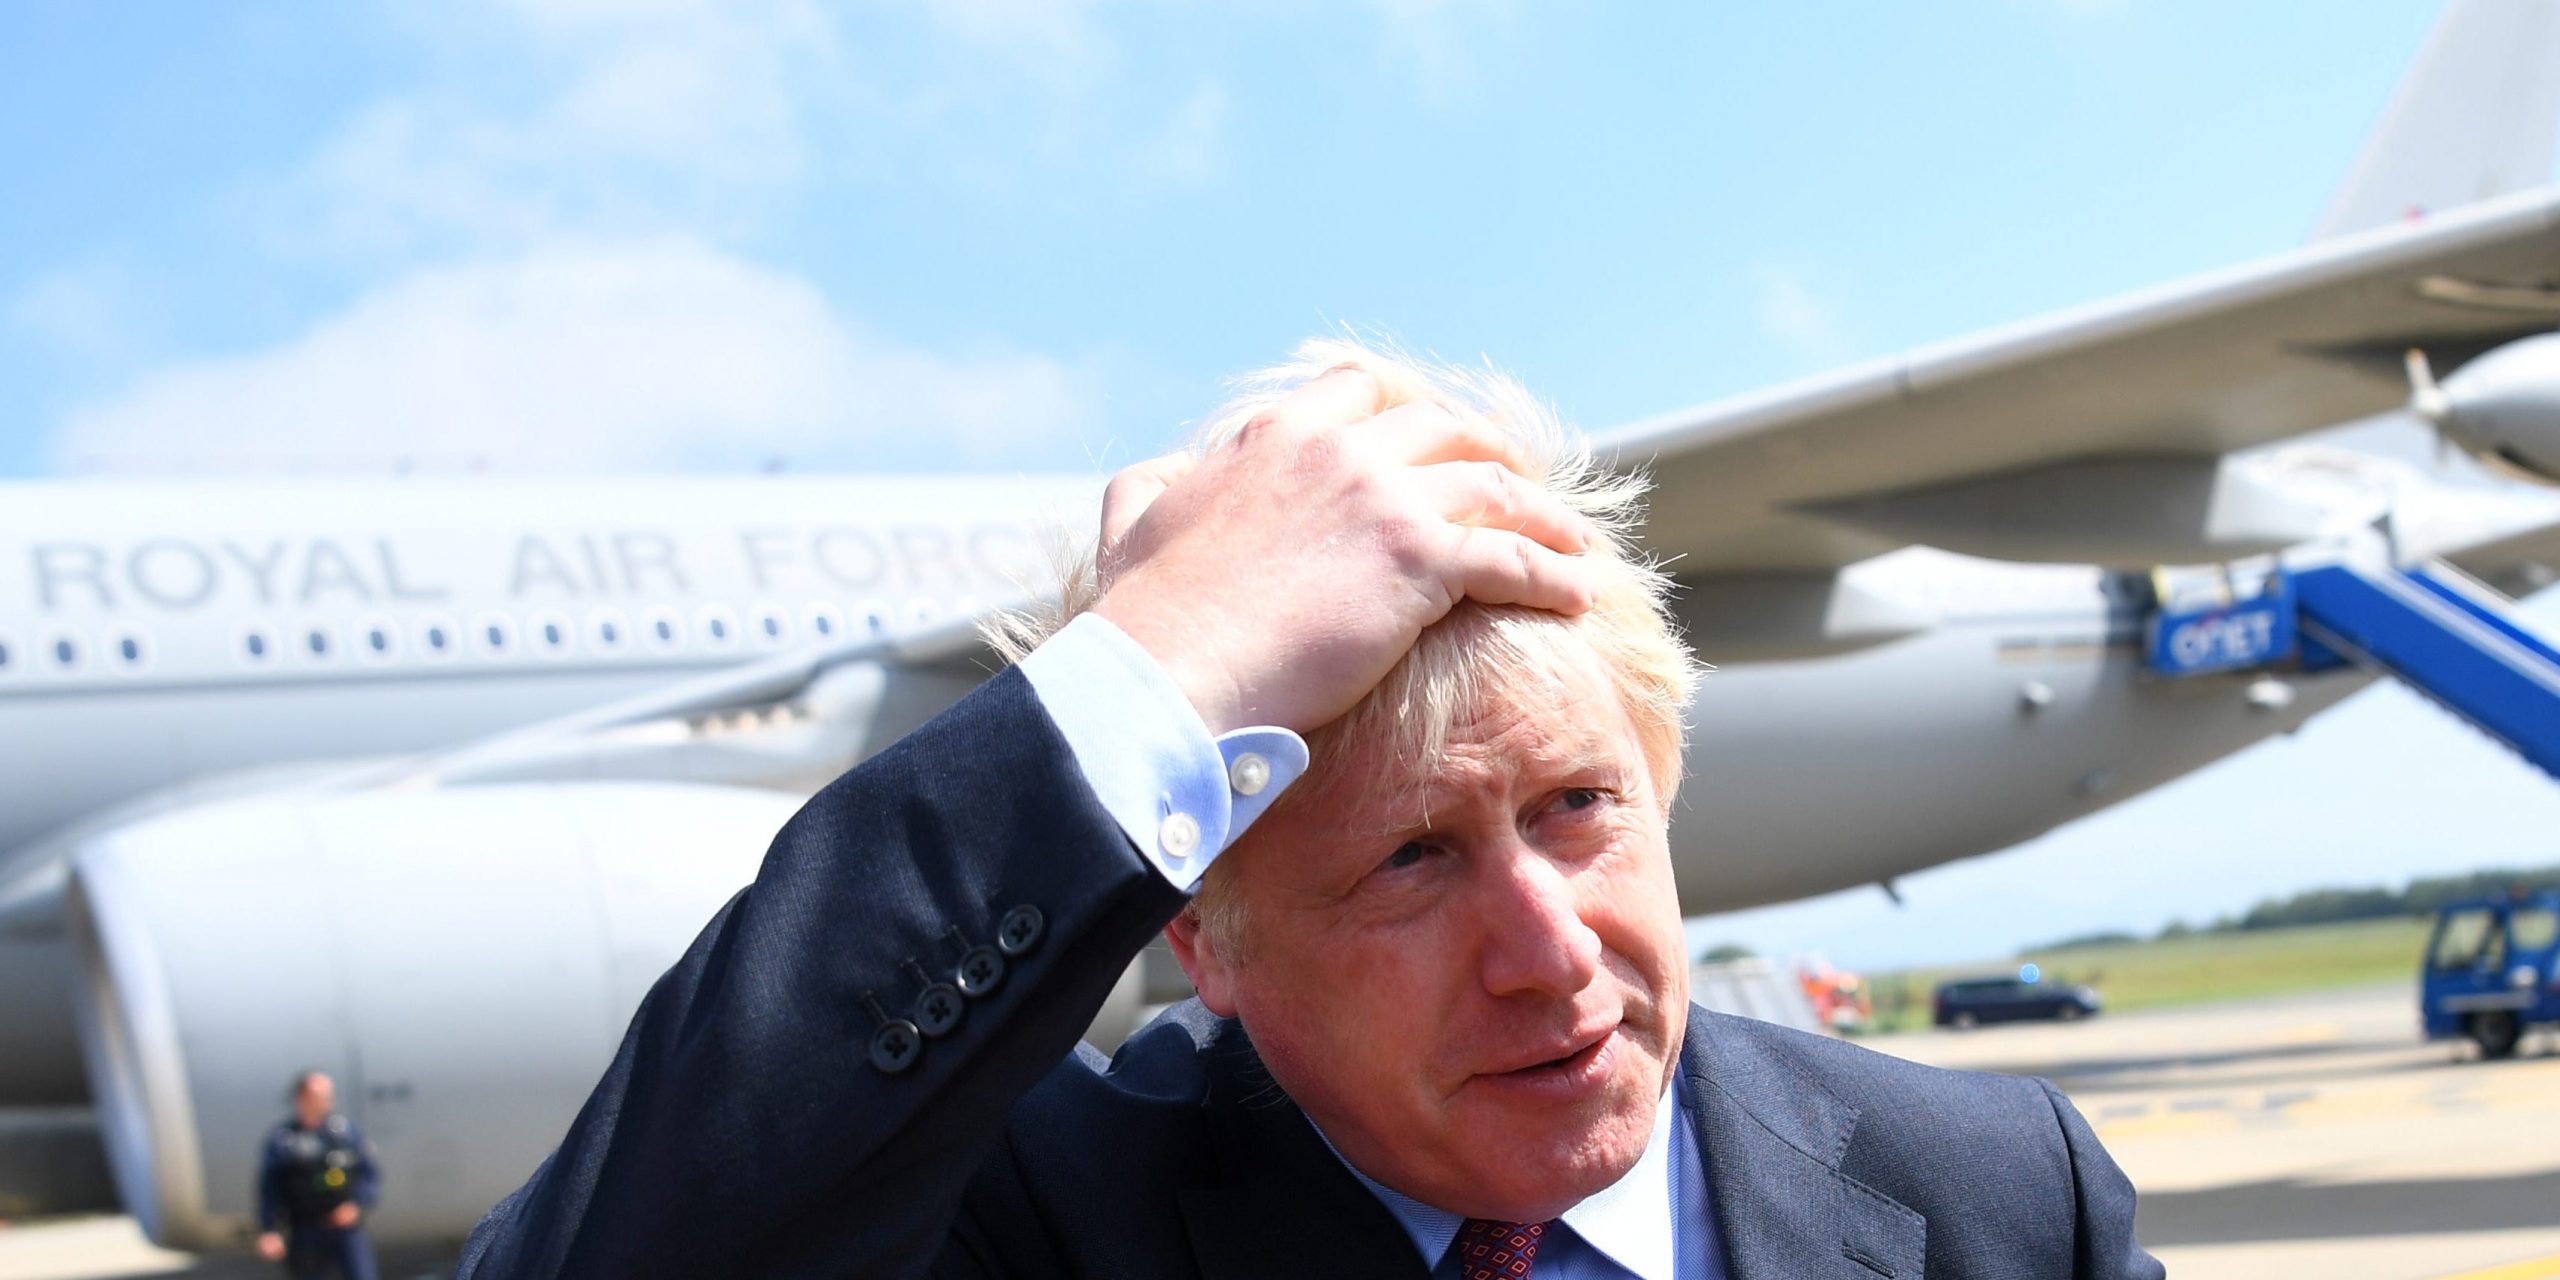 Boris Johnson clutches his hair as he is questioned by Robert Peston on an airstrip. There is an RAF jet behind him.